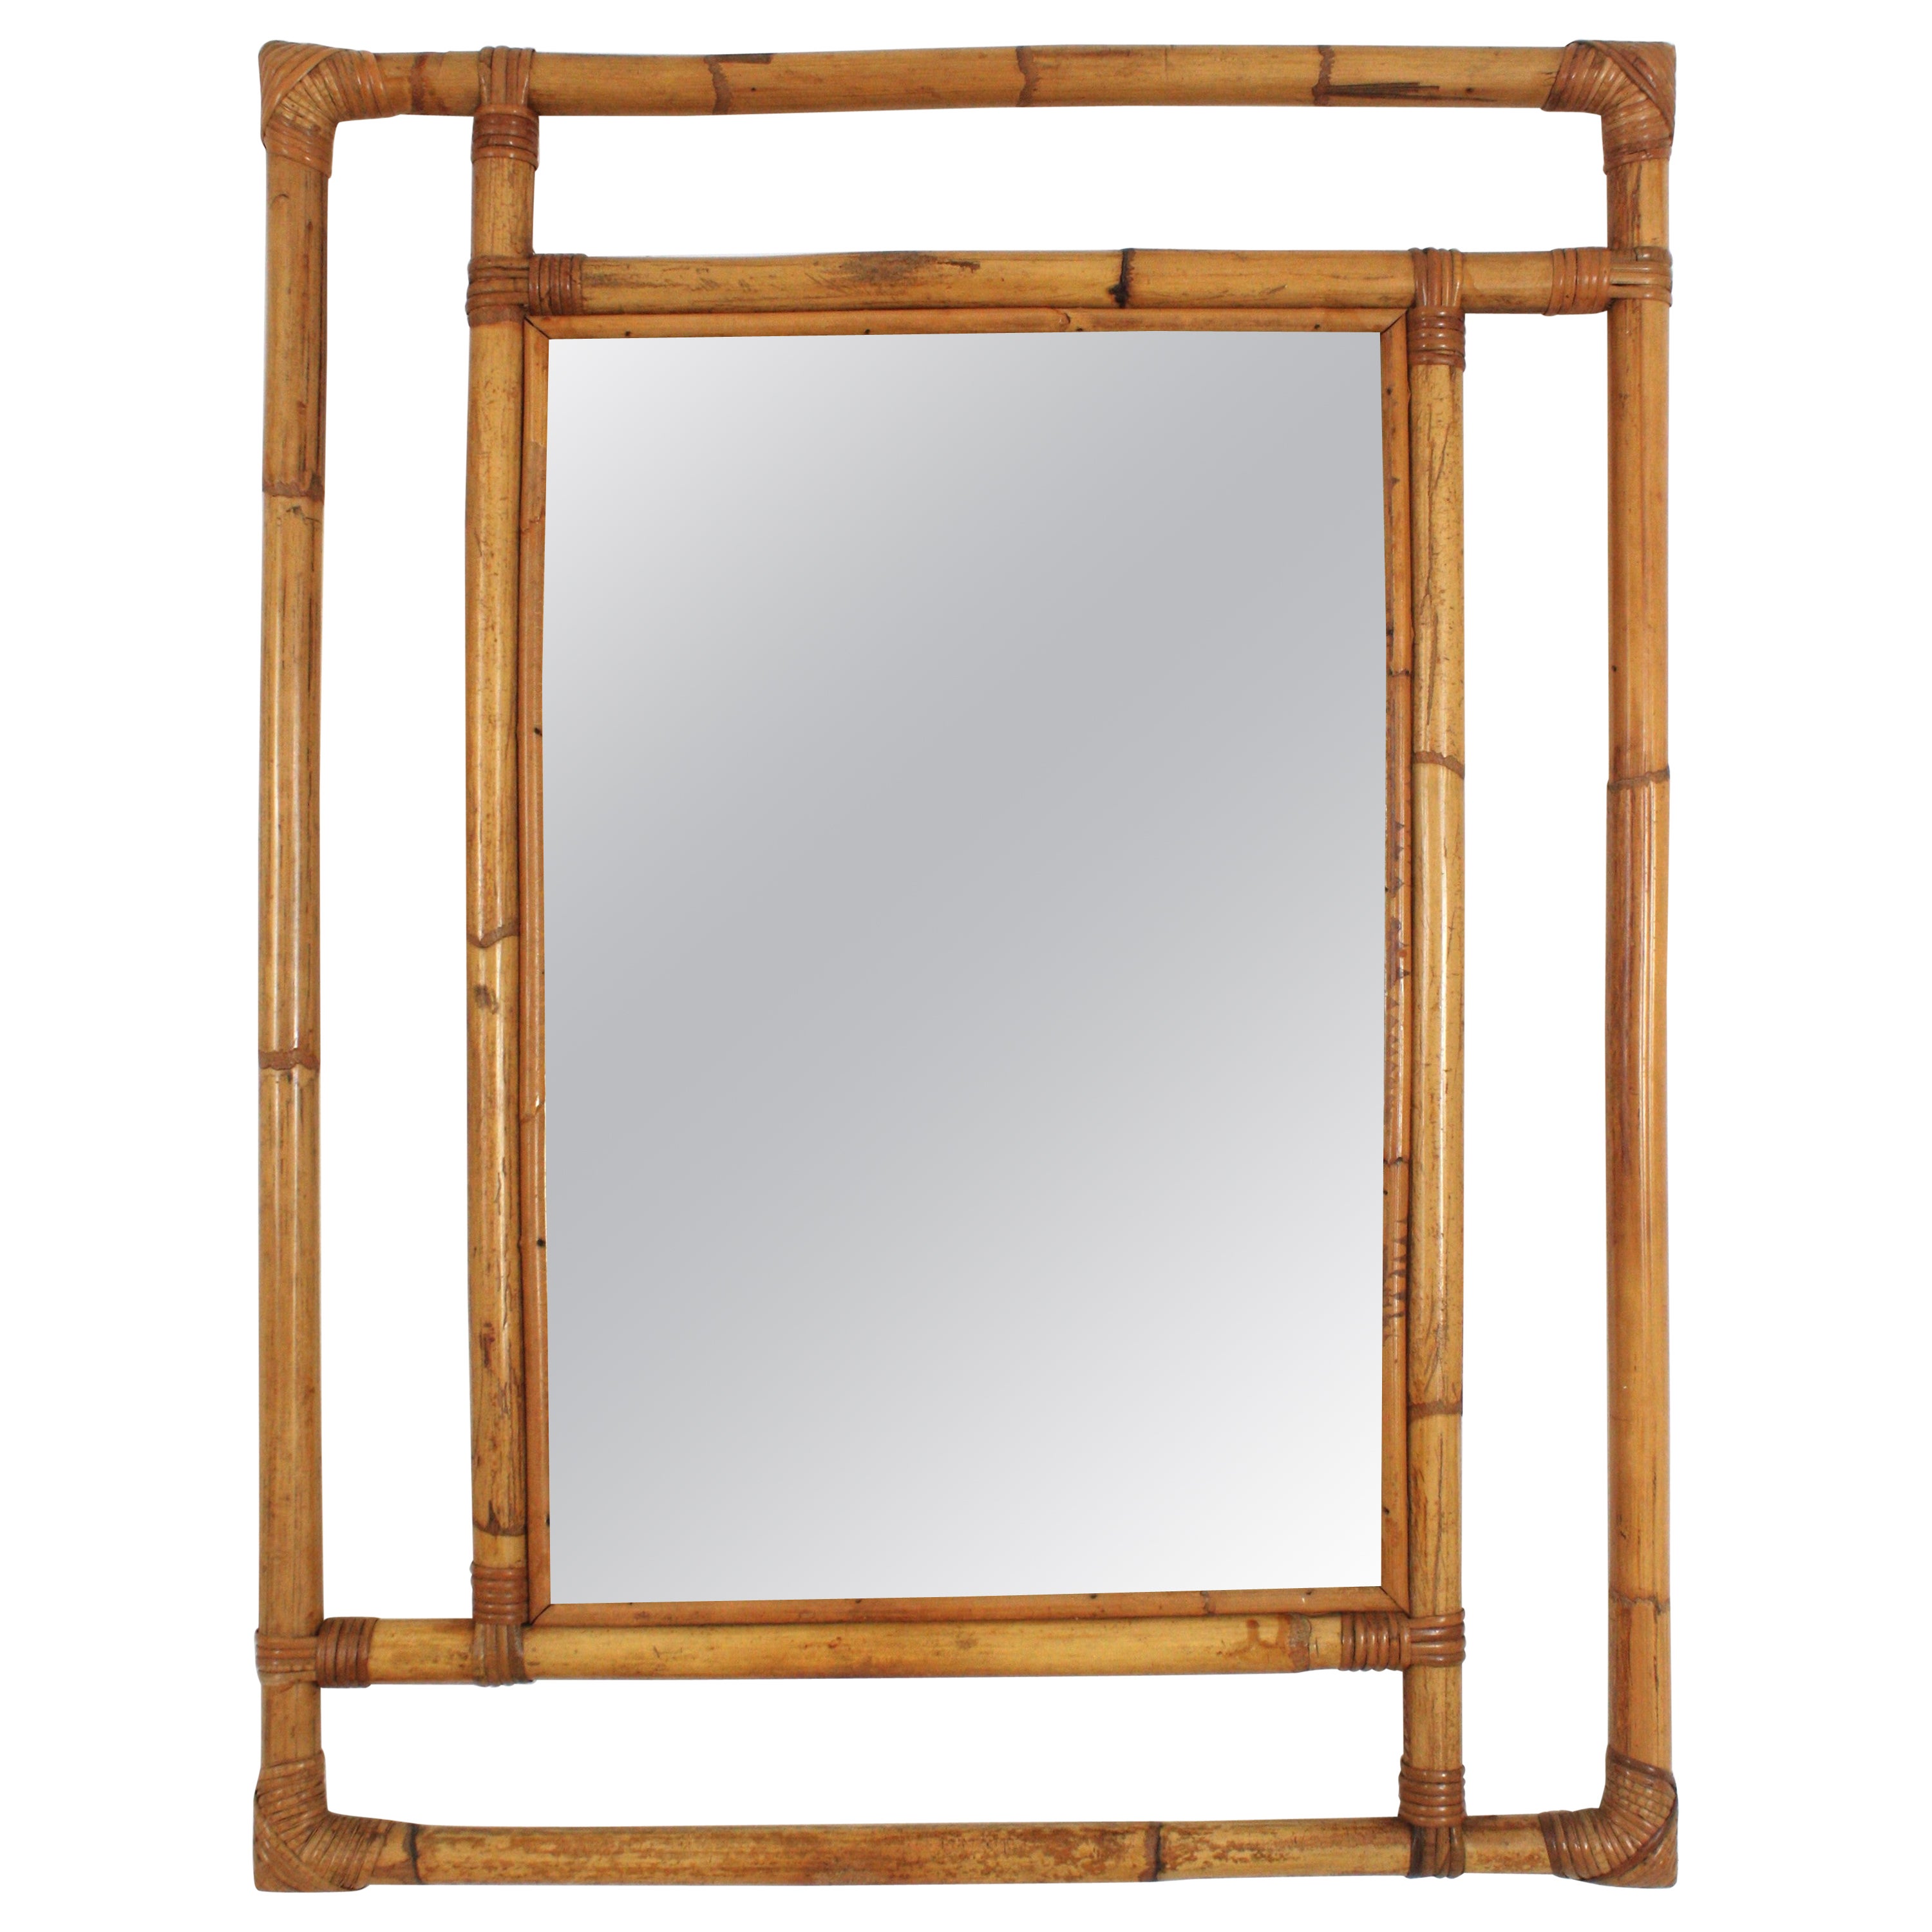 Spanish Large Rattan Rectangular Mirror with Geometric Frame, 1960s For Sale